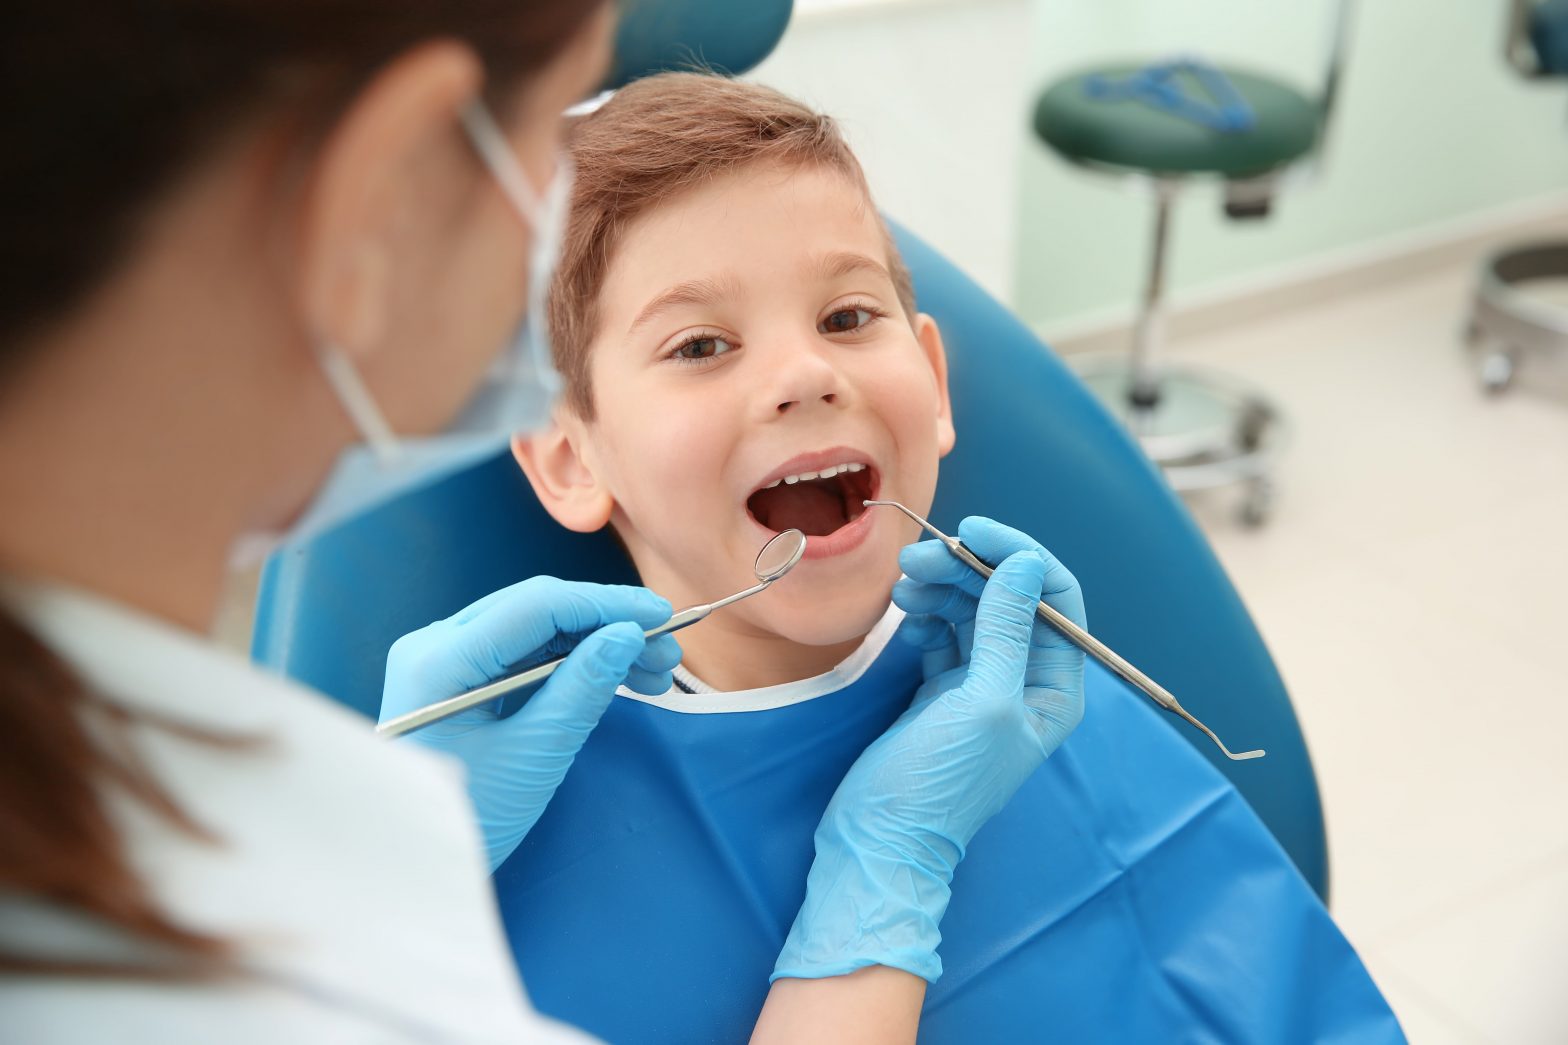 When your Child Should have their First Dental Appointment?